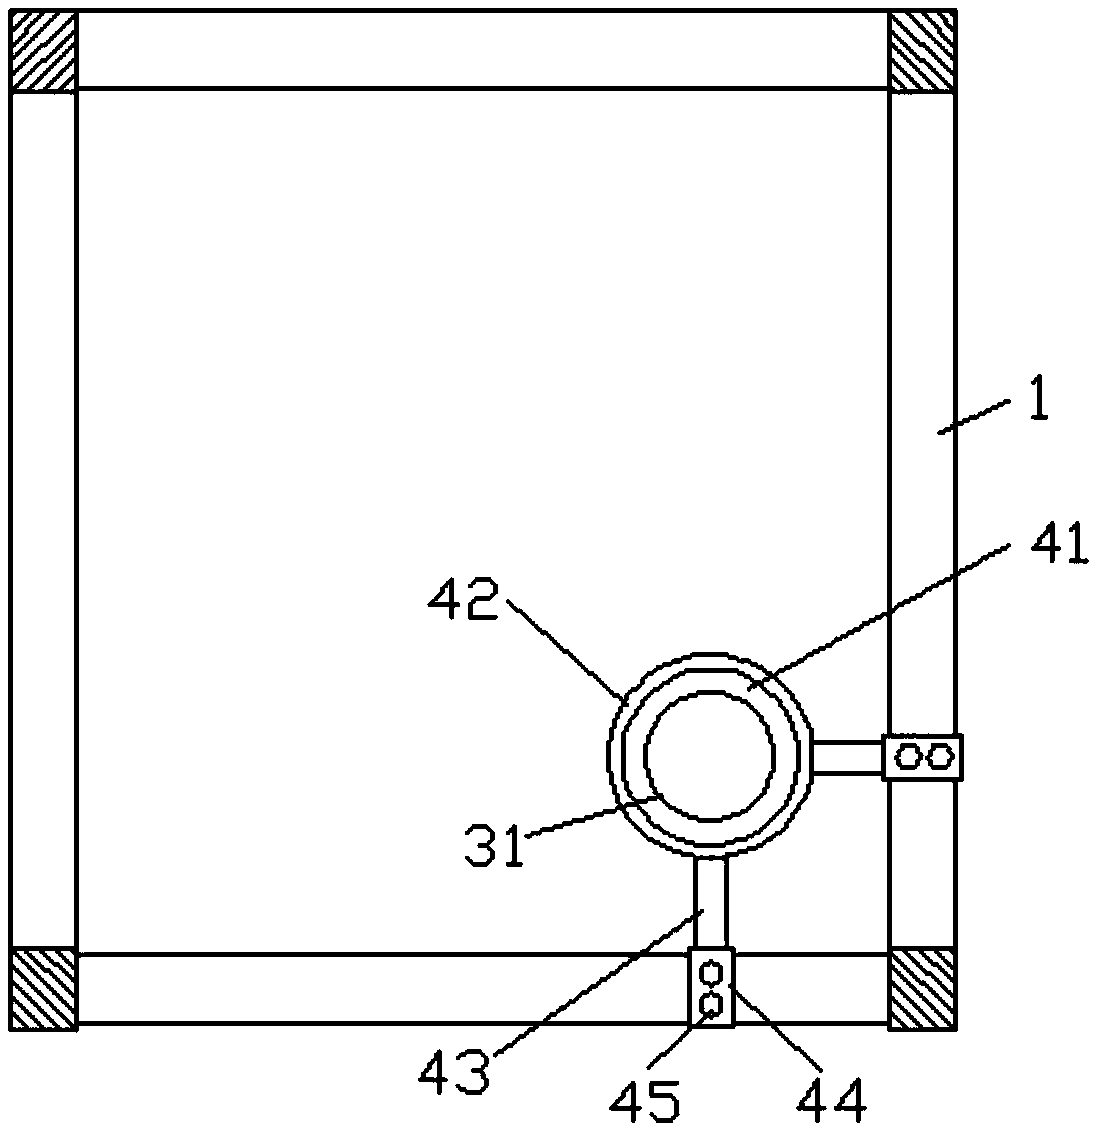 Conveying and pouring device based on concrete construction of high-rise building